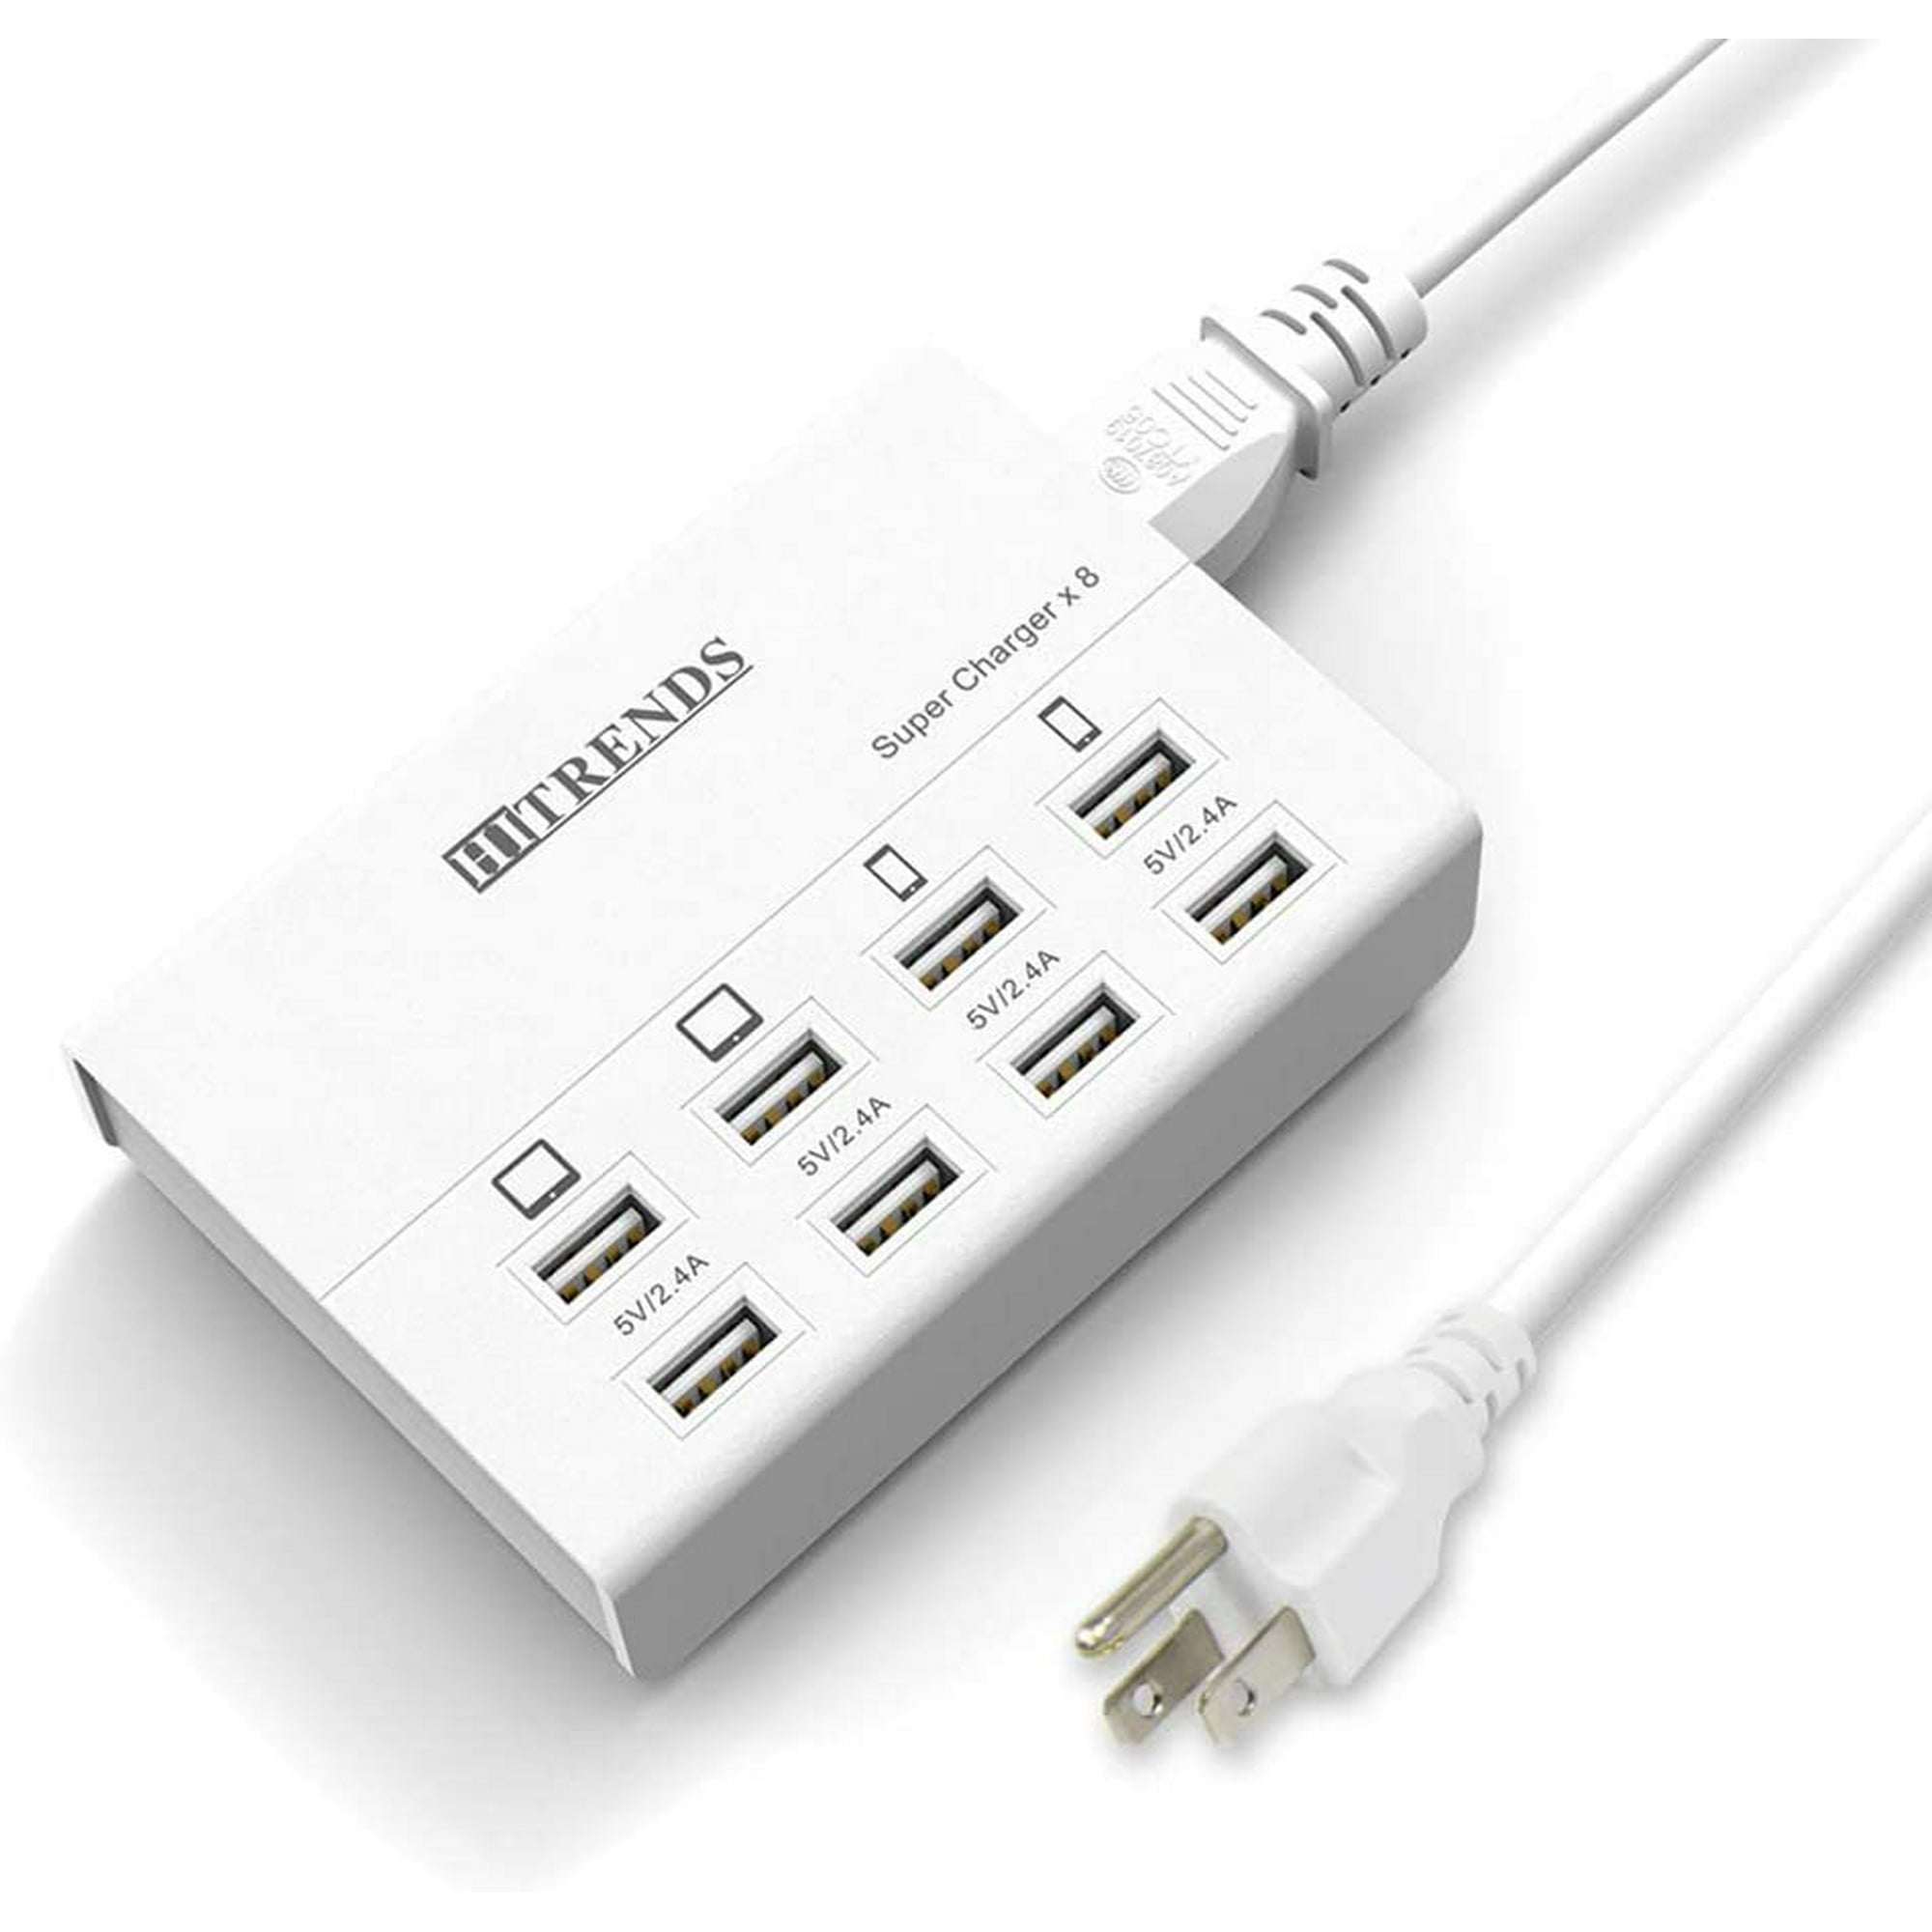 USB Charger - 8 Ports Charging Station 50W/10A Multi Port USB Charging Hub  for Multiple Devices (5ft Cord, White) | Walmart Canada